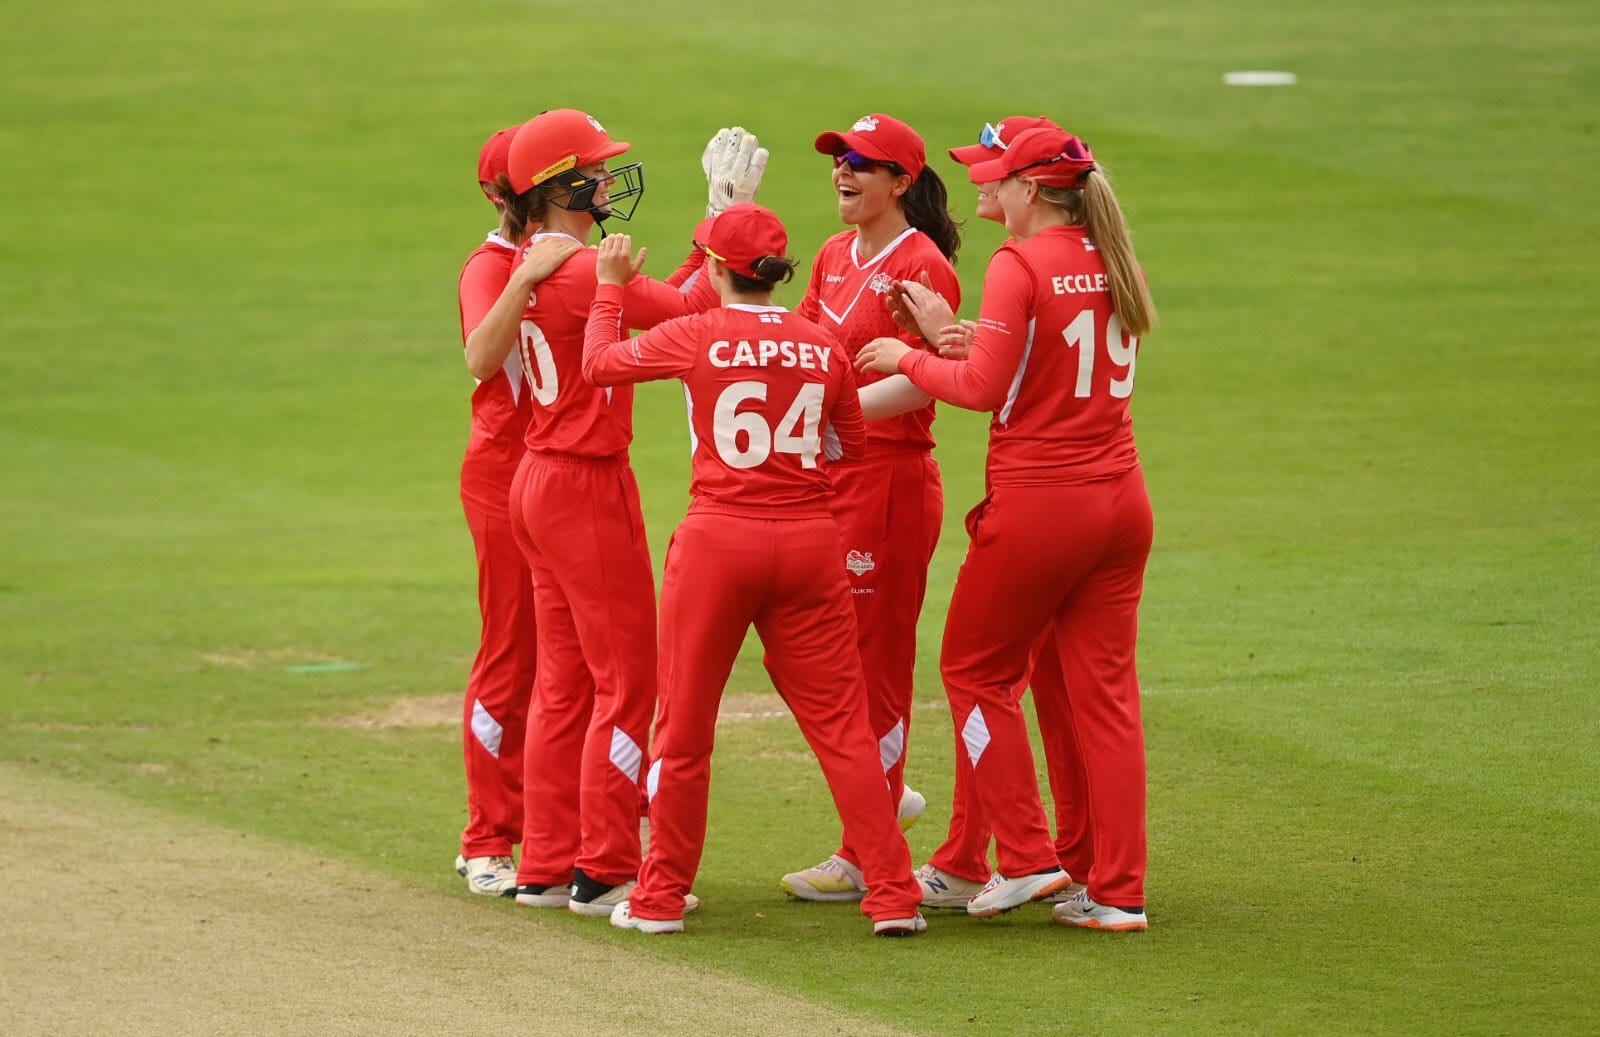 CWG 2022: ENG-W vs SA-W: Capsey, Brunt help England conquer South Africa